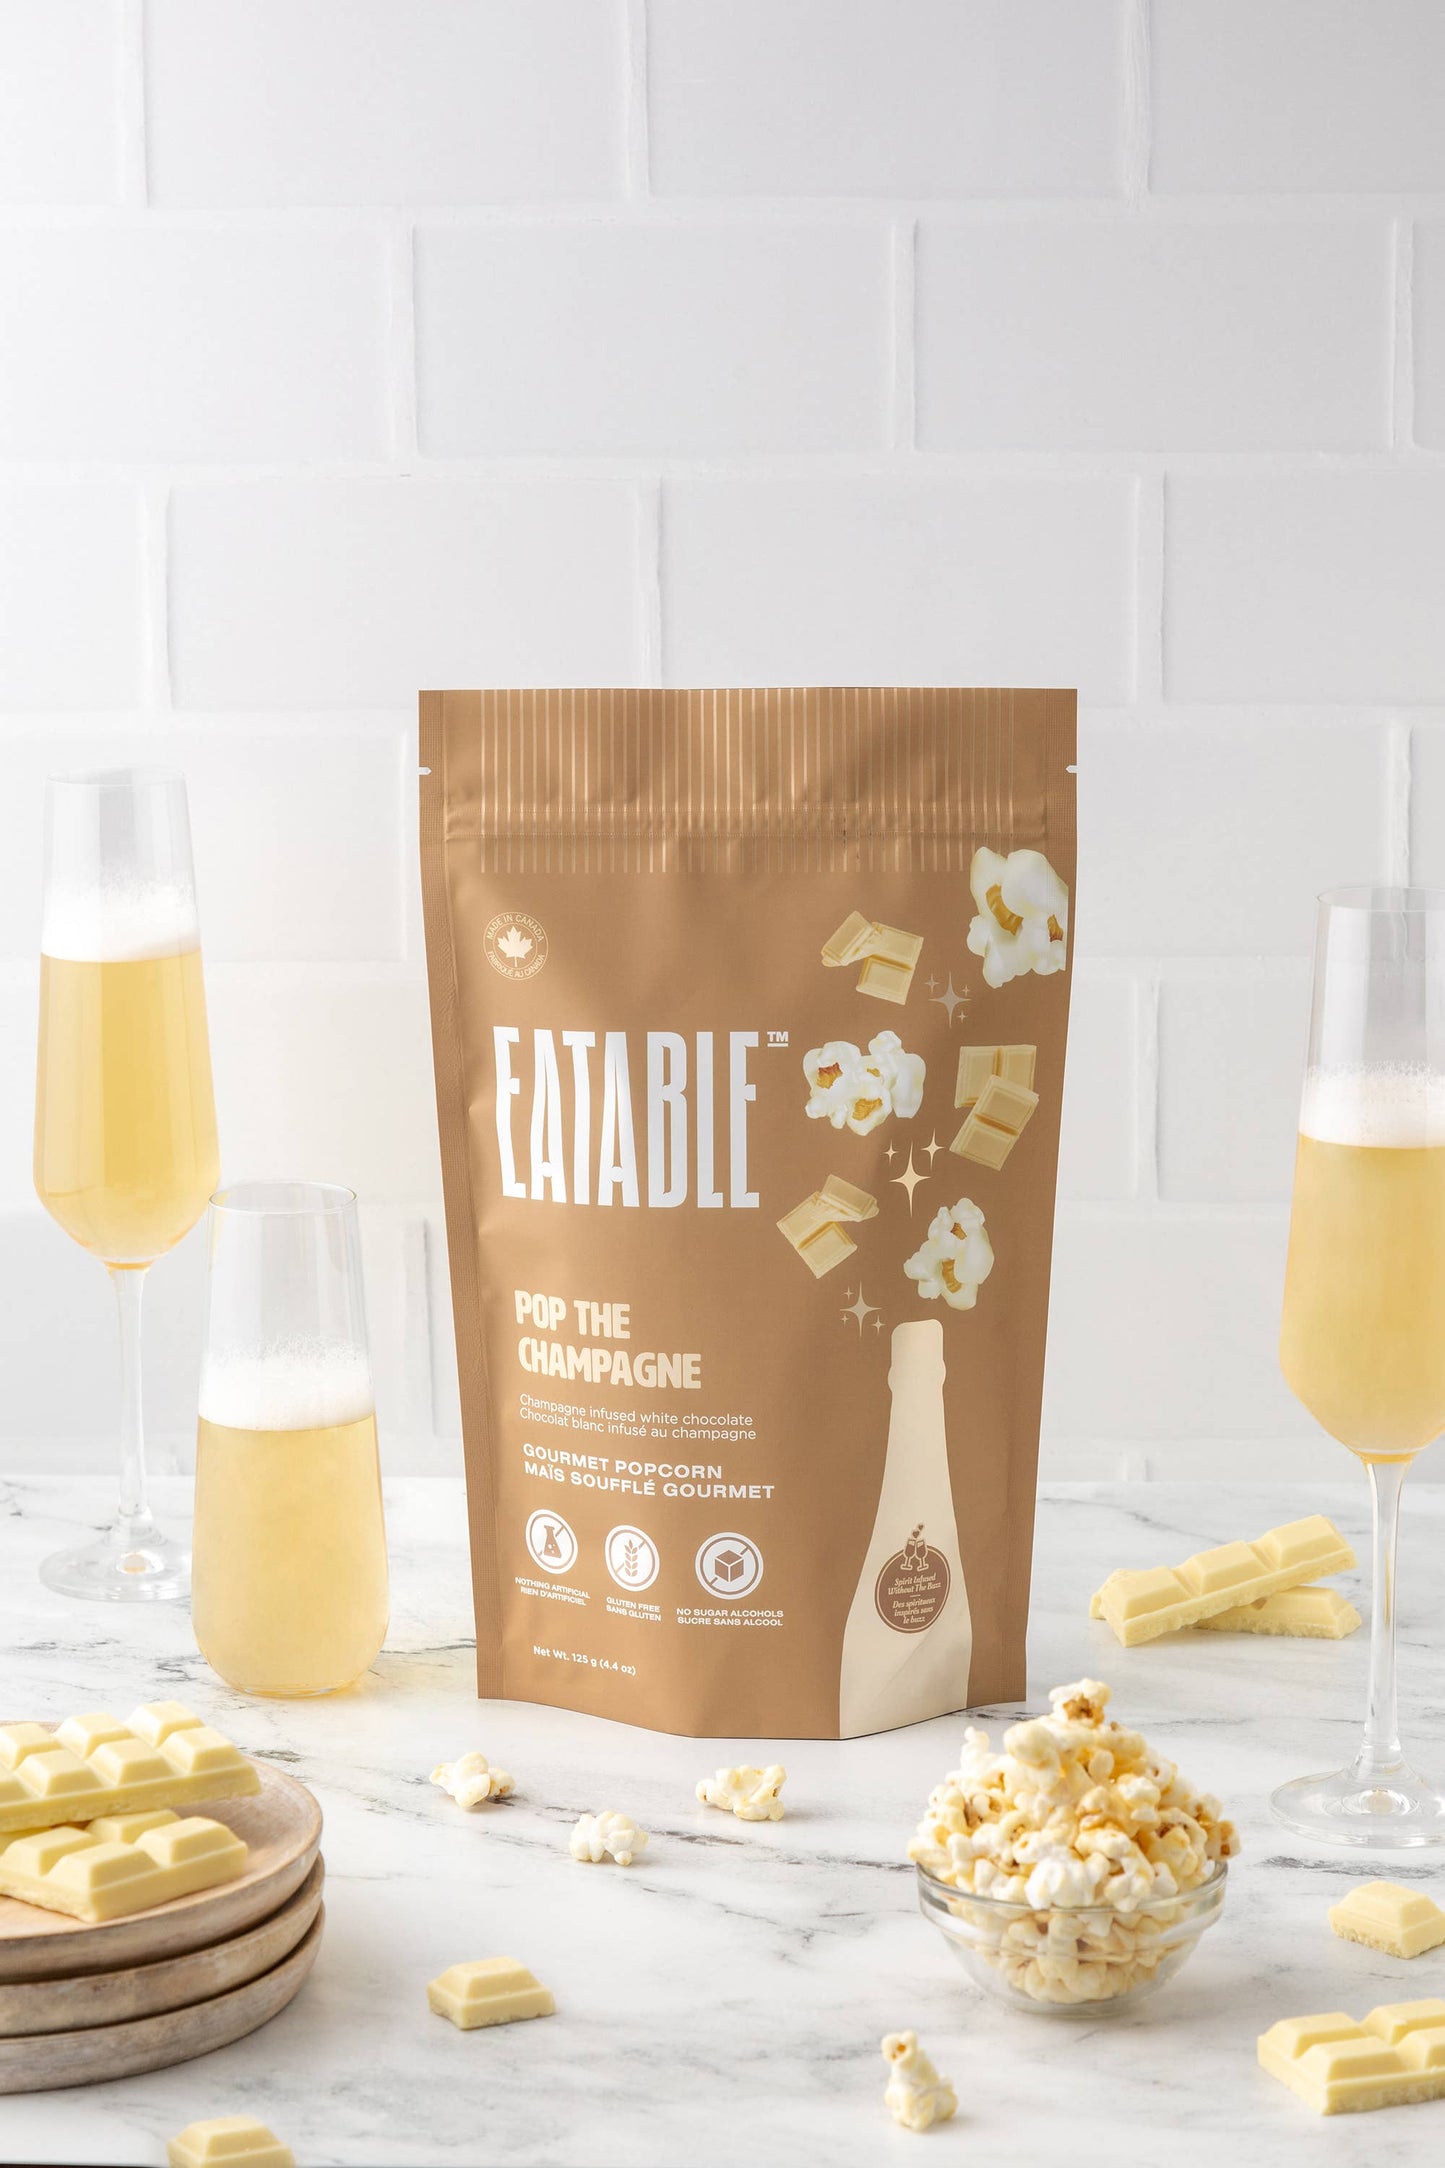 EATABLE Popcorn - Pop the Champagne (125g) 🍿🥂 Chocolate Covered Popcorn: US Package